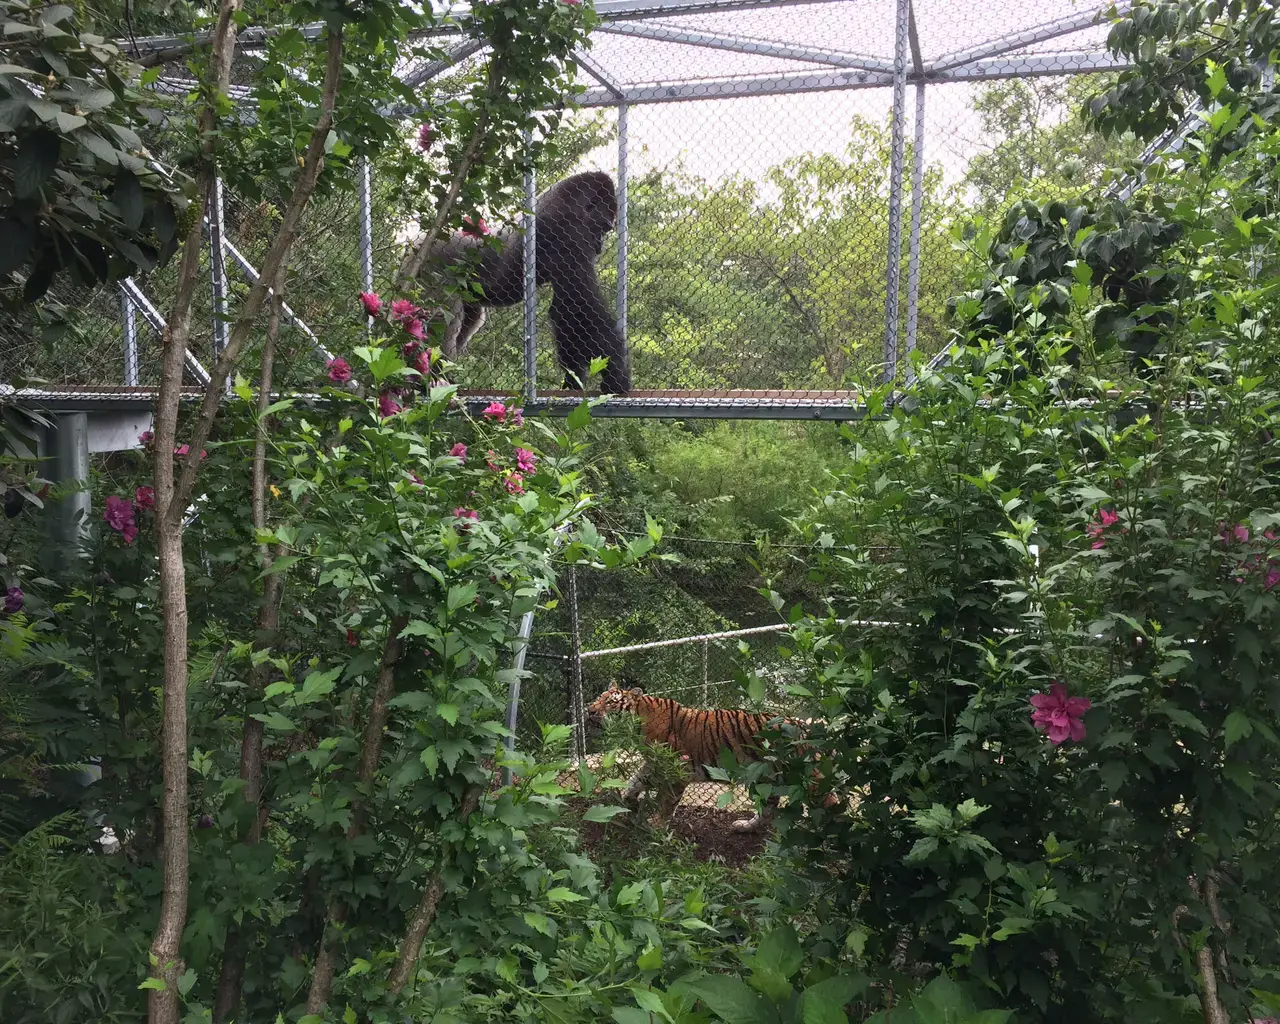 A Western lowland gorilla and an Amur tiger cross paths in Zoo360 animal exploration trails. Courtesy of the Philadelphia Zoo.